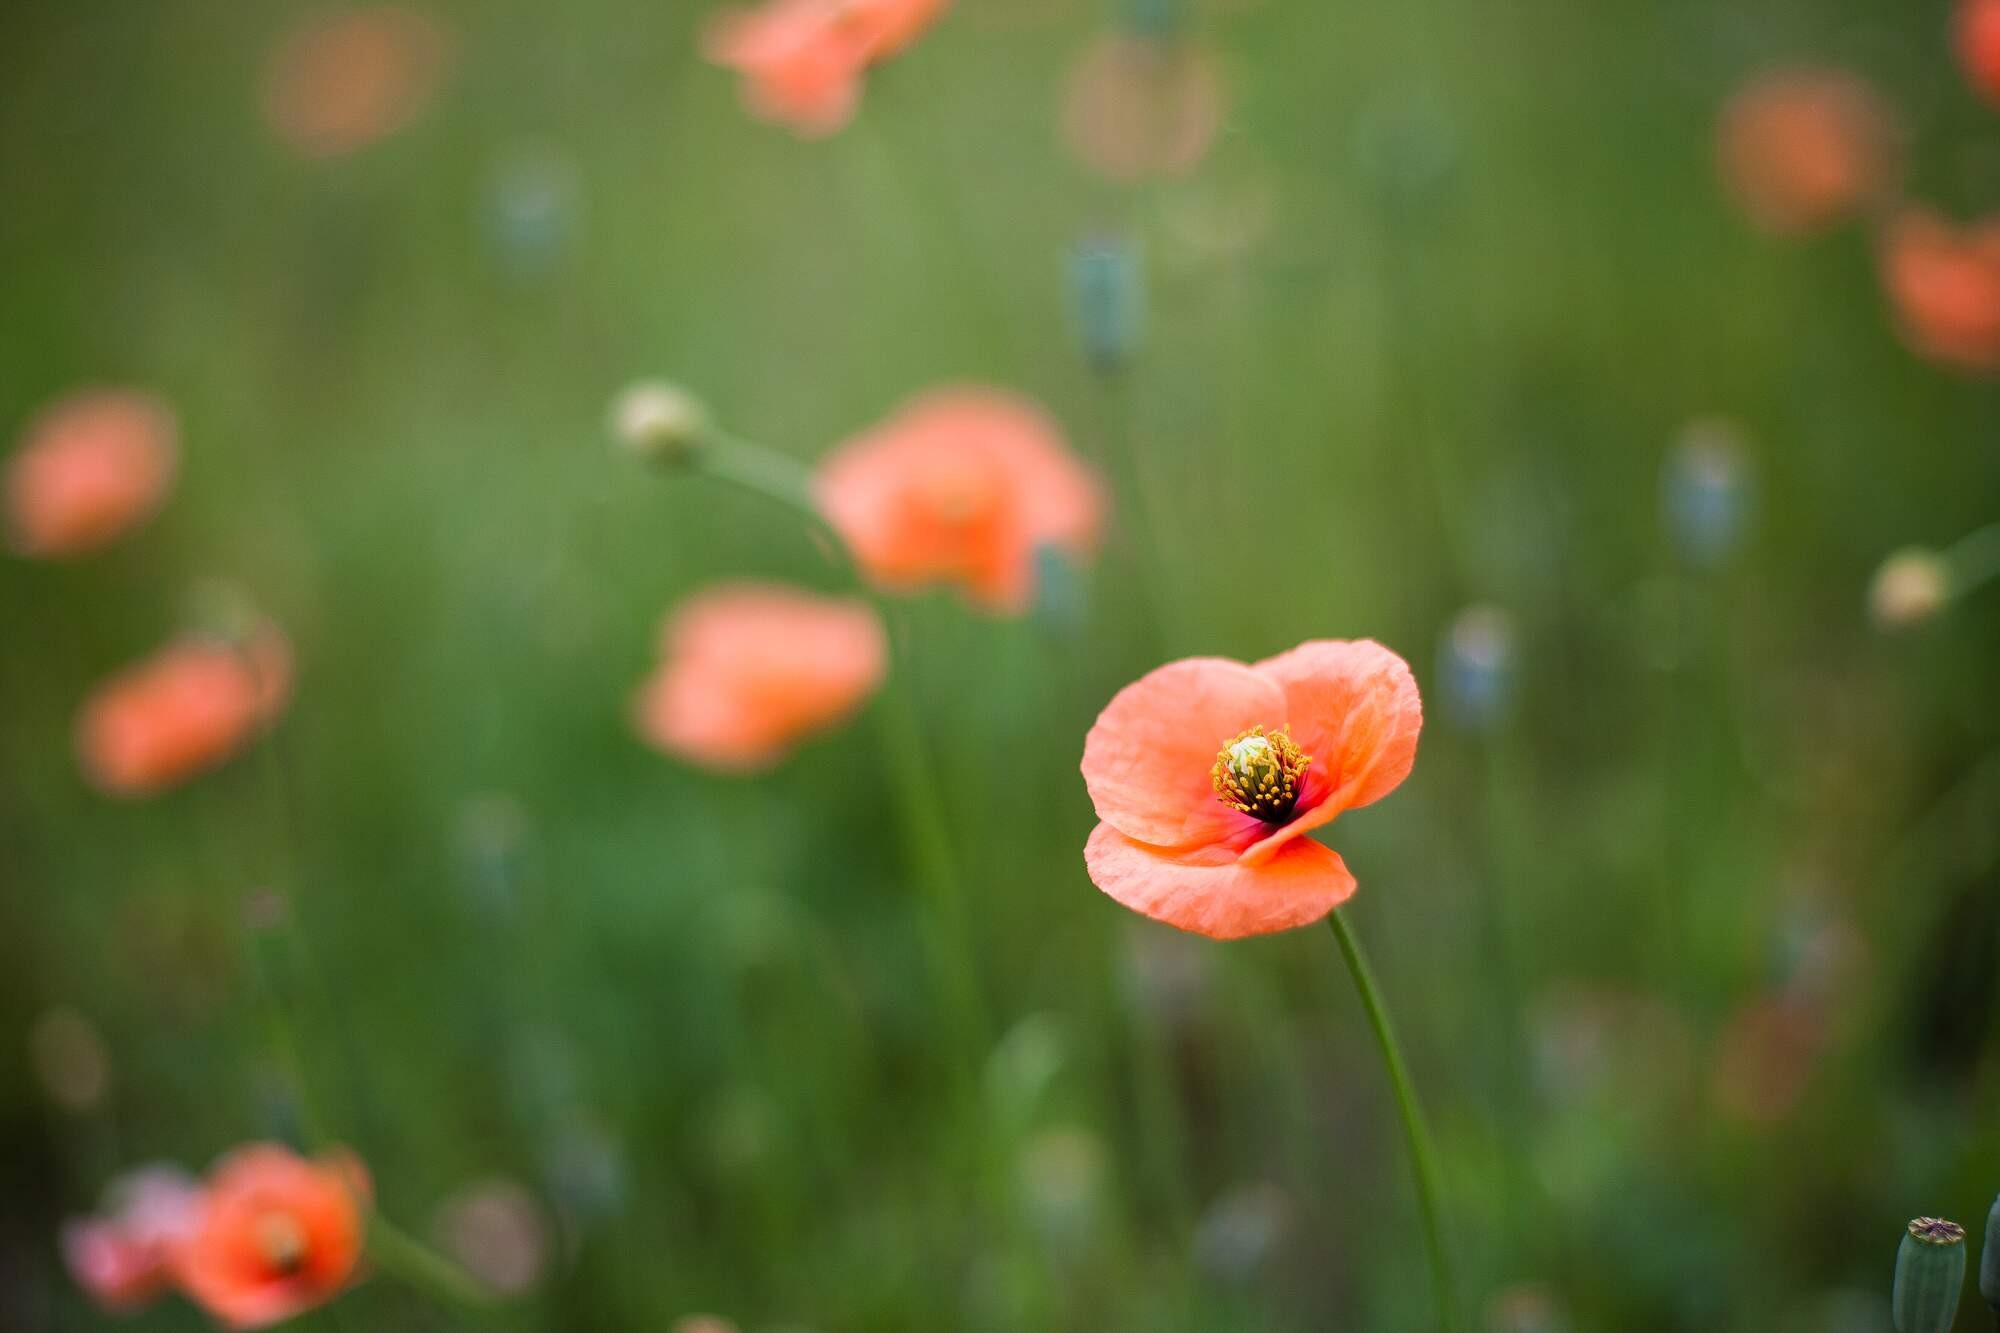 General 2000x1333 poppies flowers nature macro plants outdoors